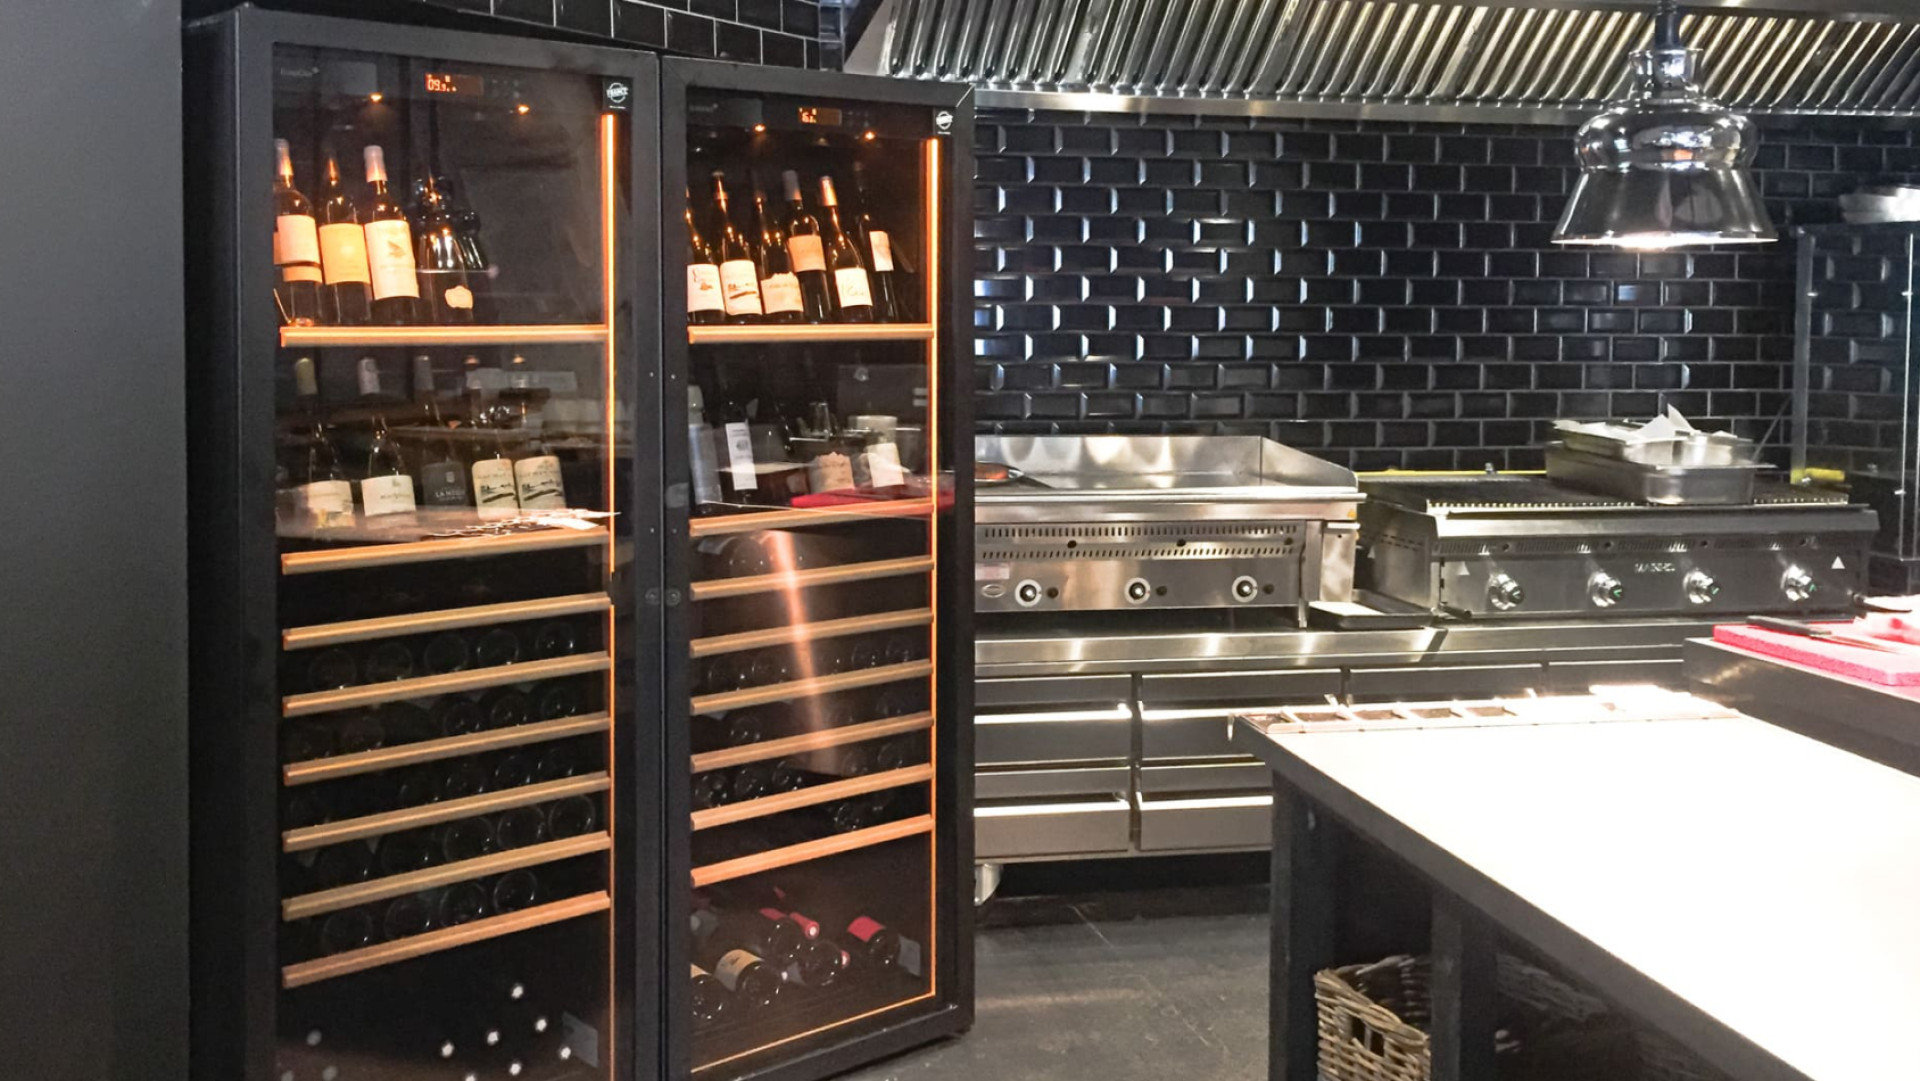 Simplified management of wine references offered on the menu thanks to this double aging wine cabinet which allows wines to be kept safely while respecting wine conservation criteria.